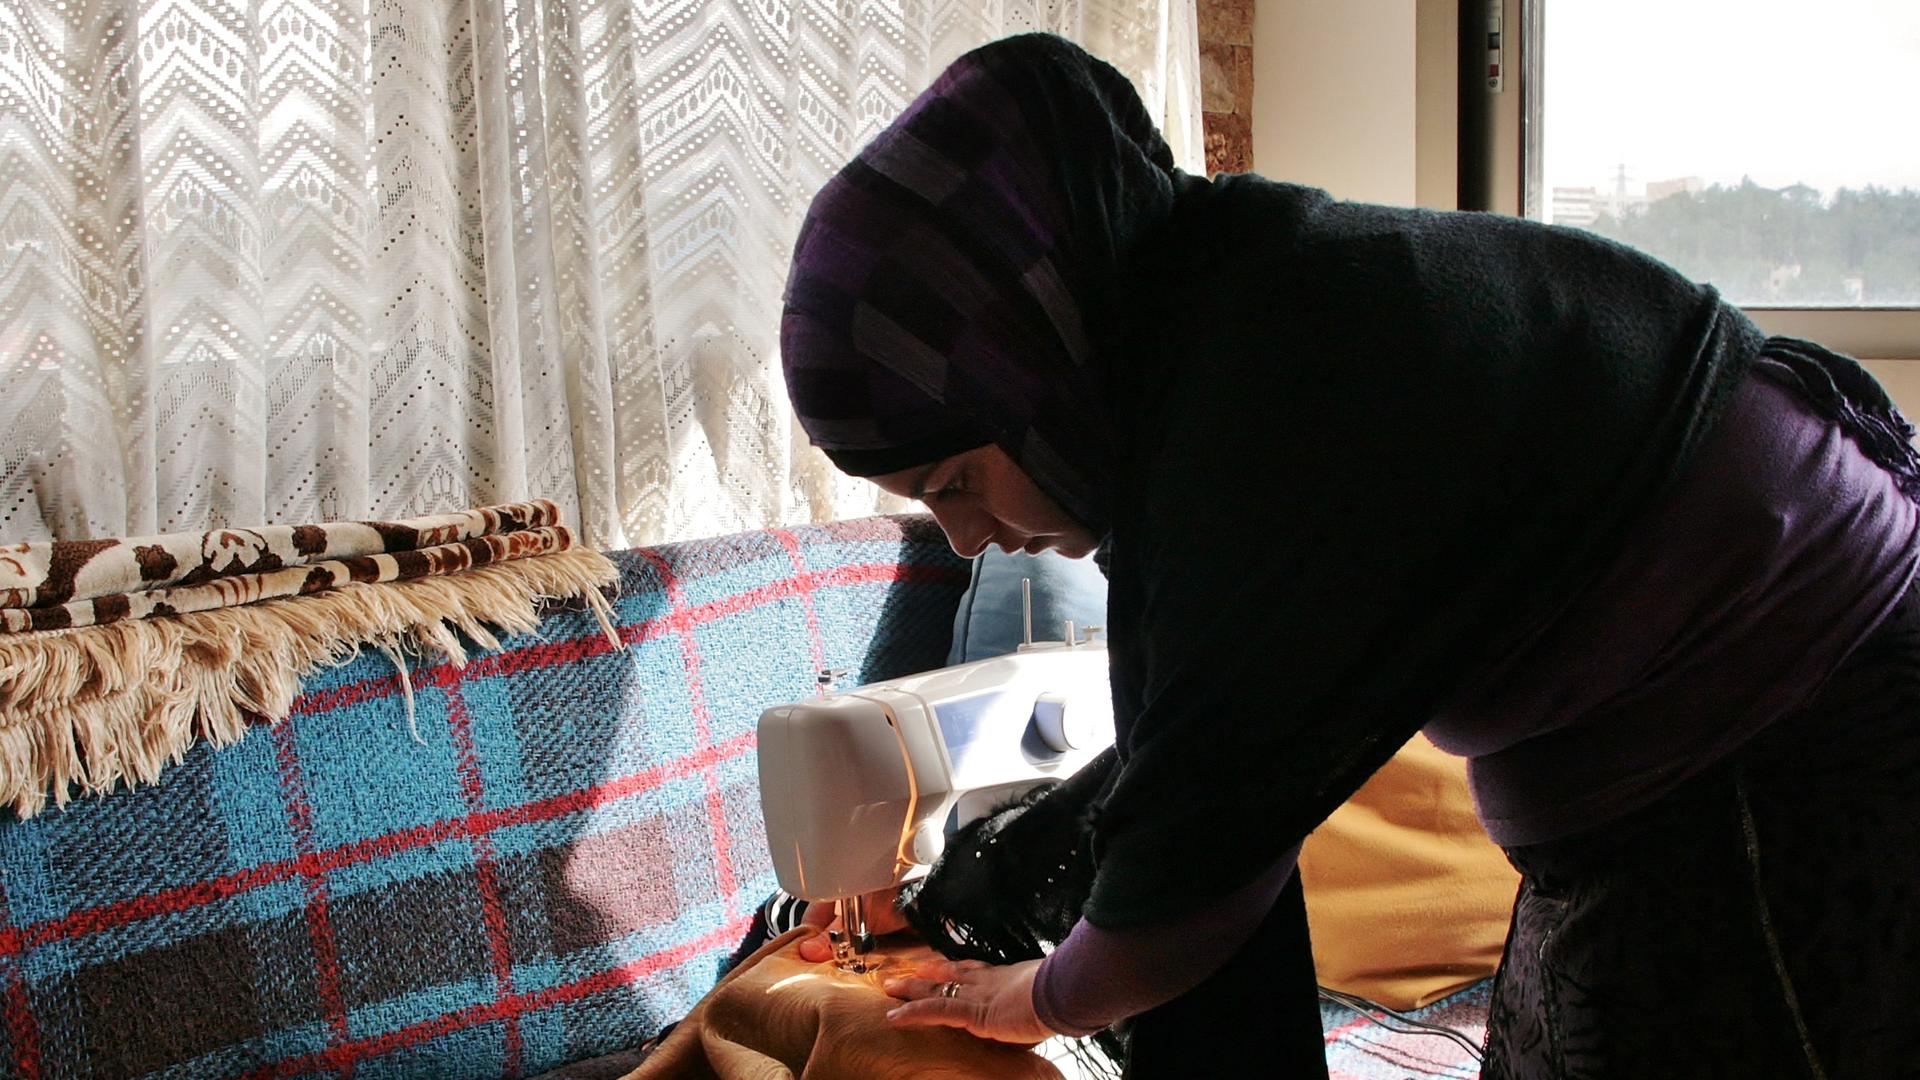 Hiba Bekai's office is her home, where she sews and does other needle work that she sells to Syrians and Lebanese.